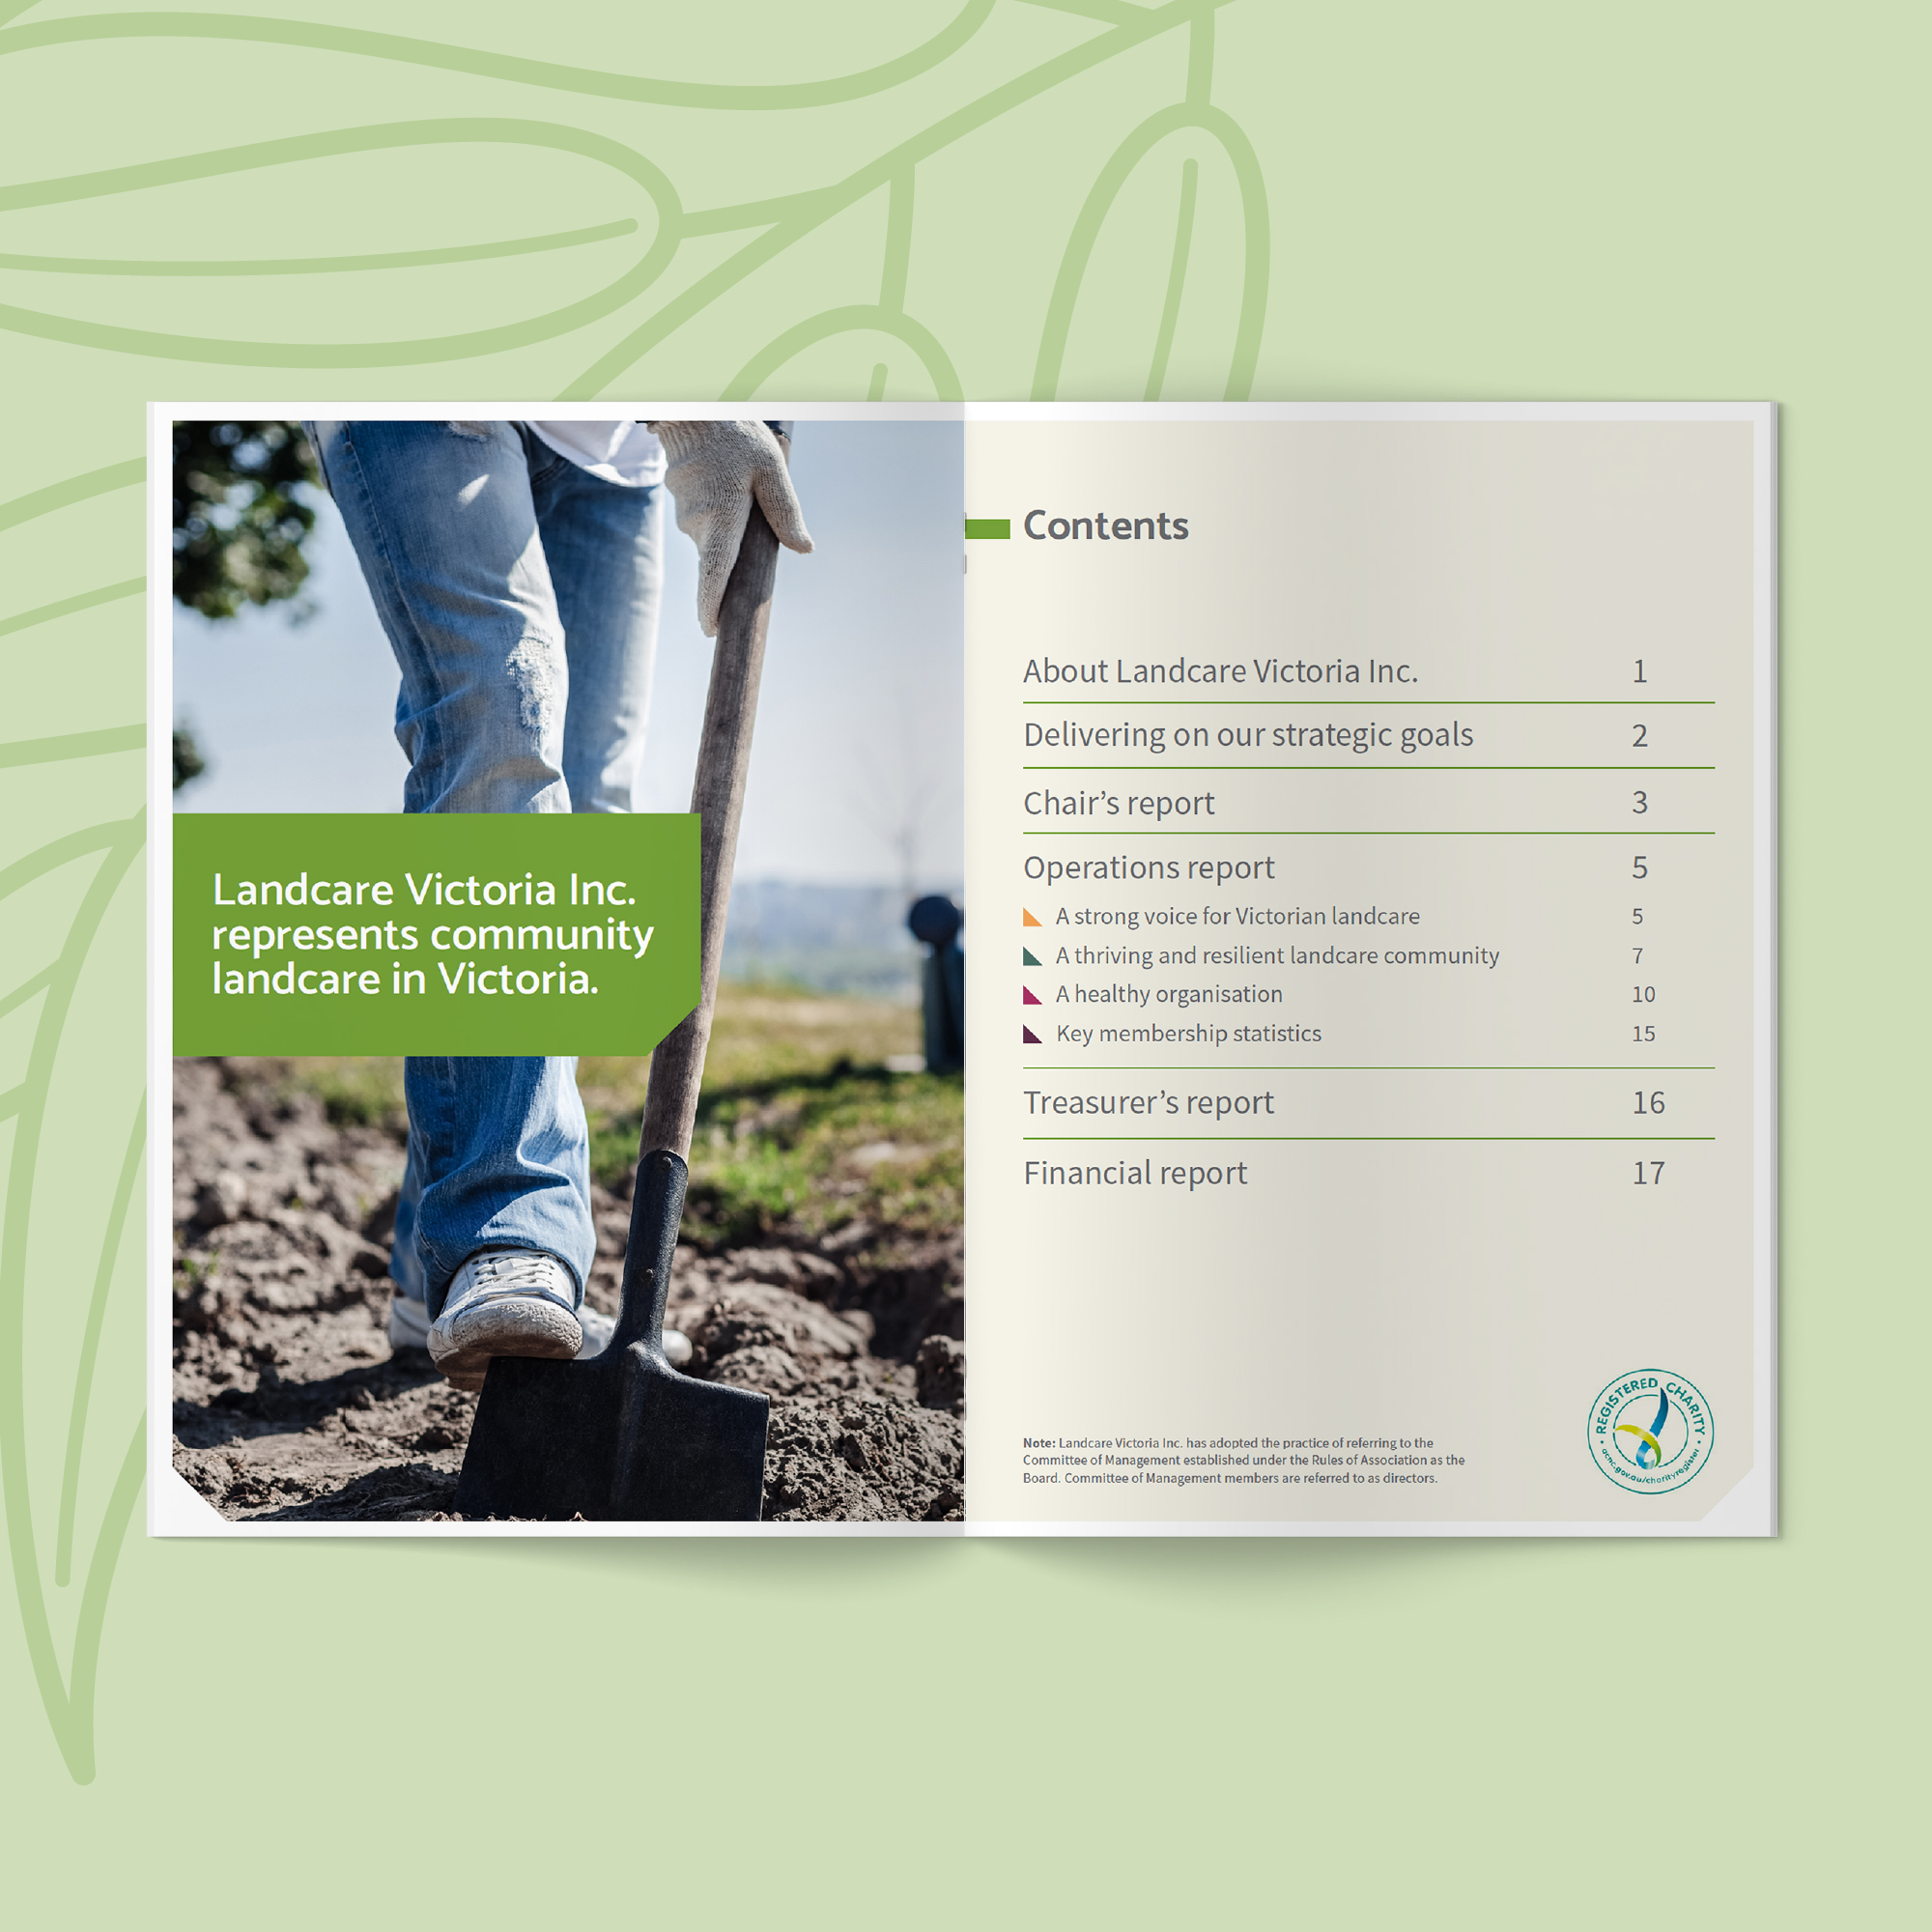 Full colour mockup of Landcare Victoria's 2023 annual report contents spread on a light green background with a pattern of gum leaves. The image on the left page features a person from the waste down wearing blue jeans and boots holding a shovel in the dirt, indicating tree planting. The right hand page displays the contents of the report in a list format with relevant sections and page numbers.